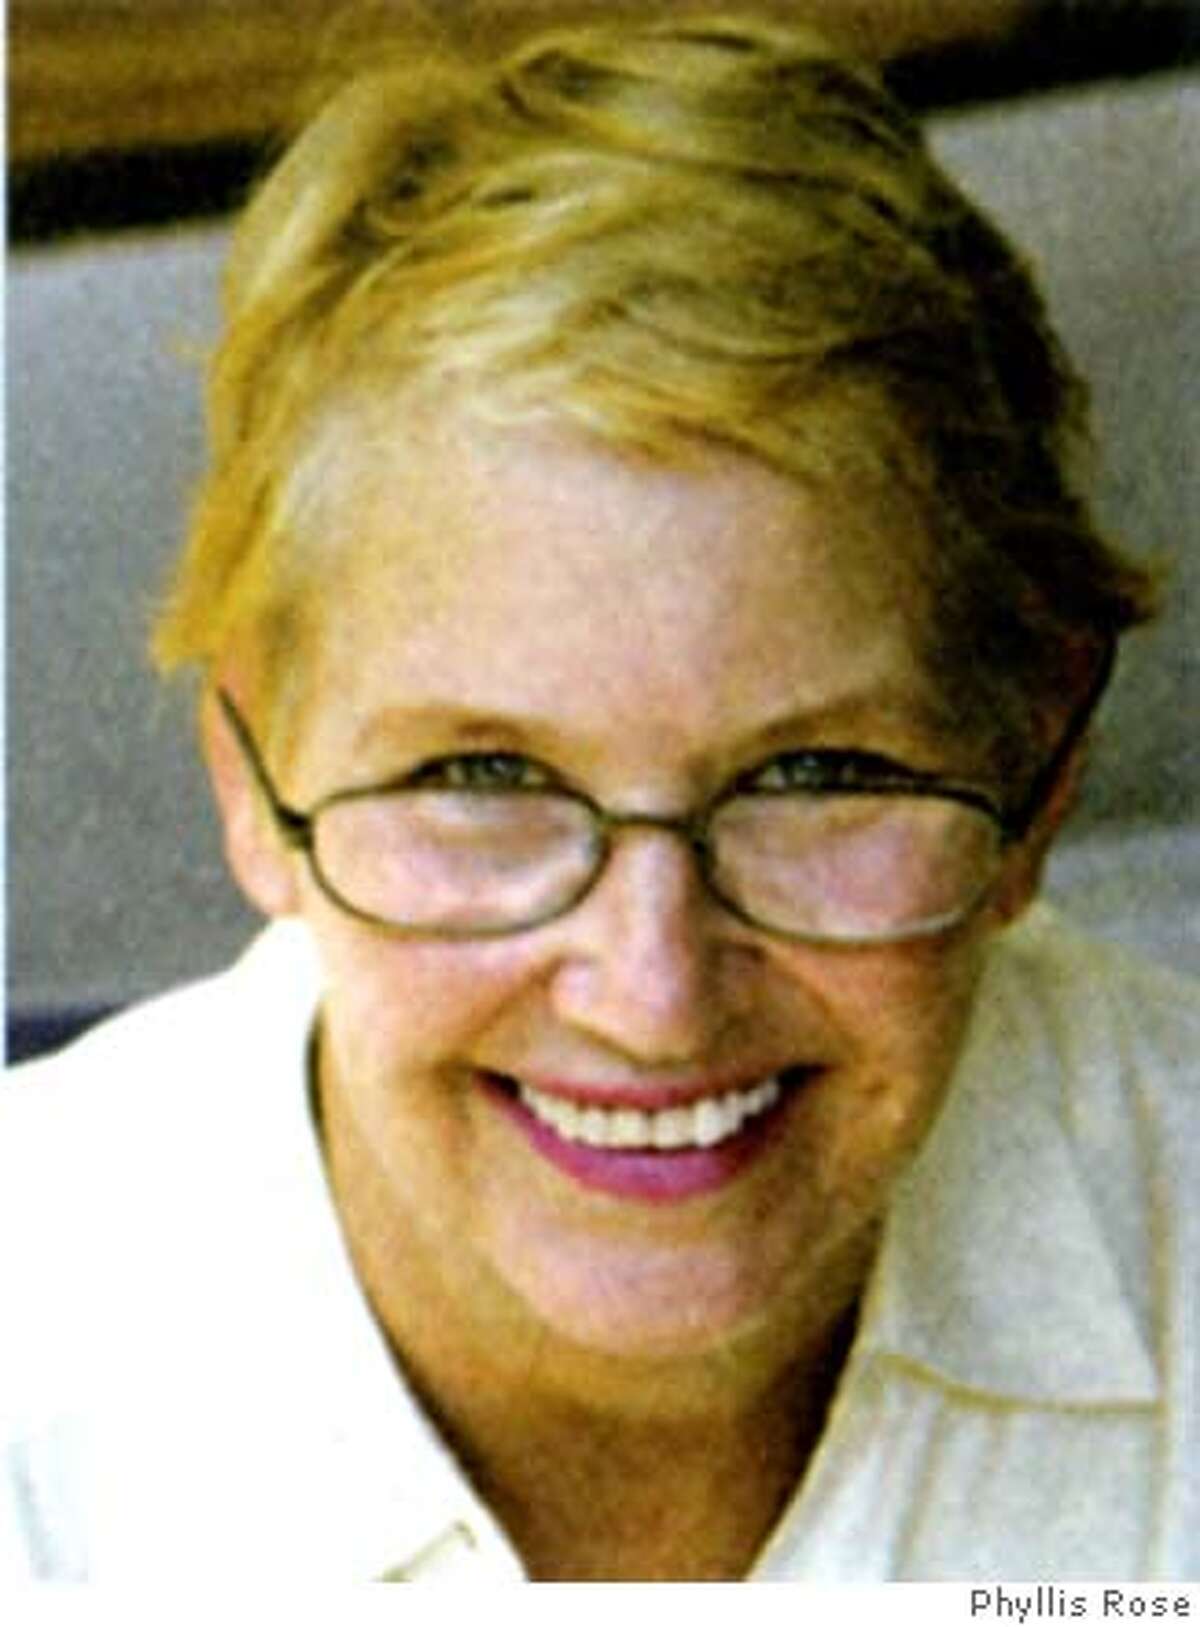 Annie Dillard photograph from the jacket of her new book called "The Maytrees" photo by Phyllis Rose.